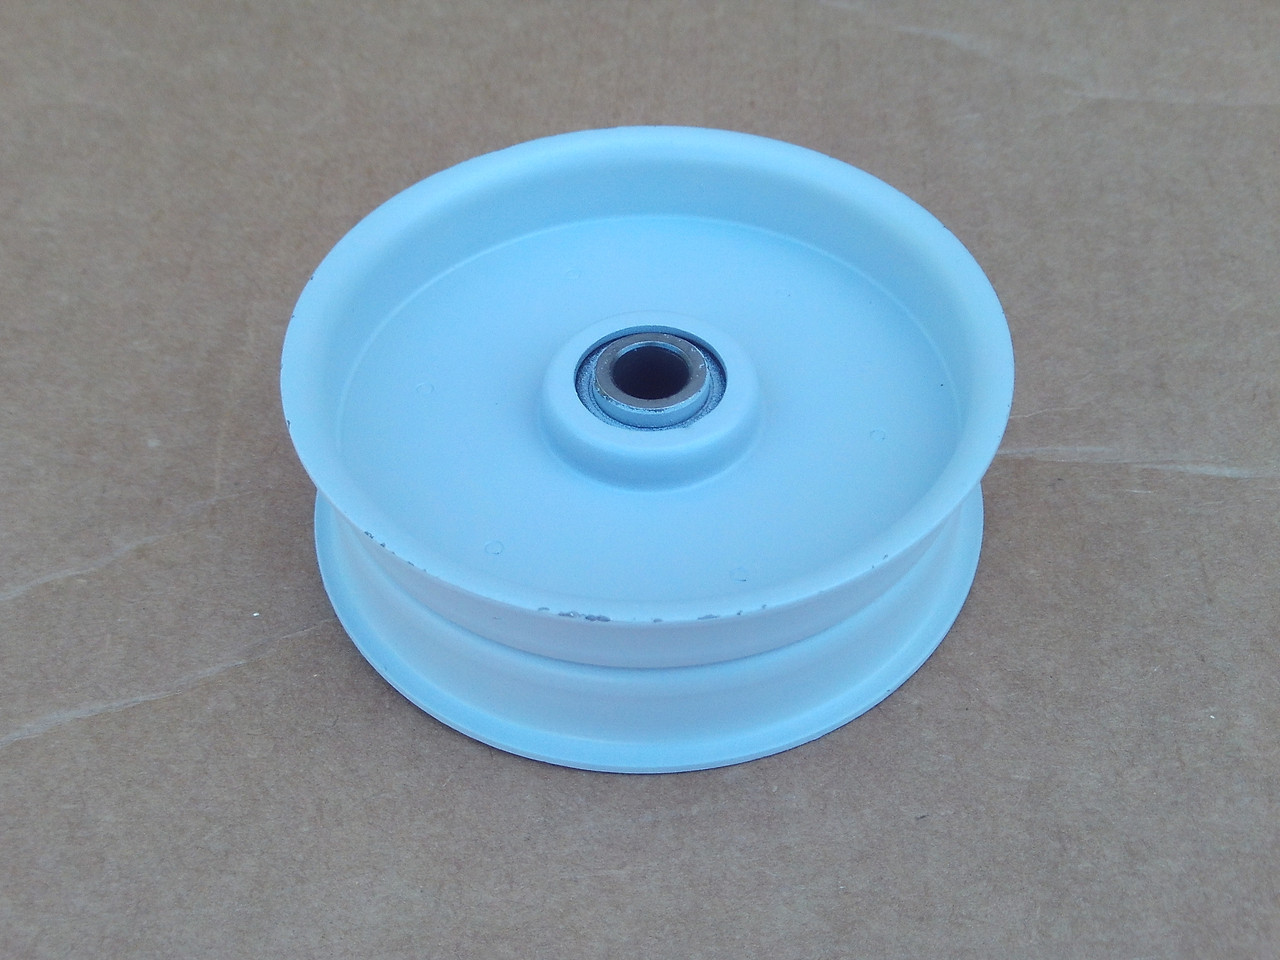 Idler Pulley for Simplicity 164268 164268SM 1685144 1685144SM Flat Height: 1-3/16" ID: 3/8" OD: 3-9/16"